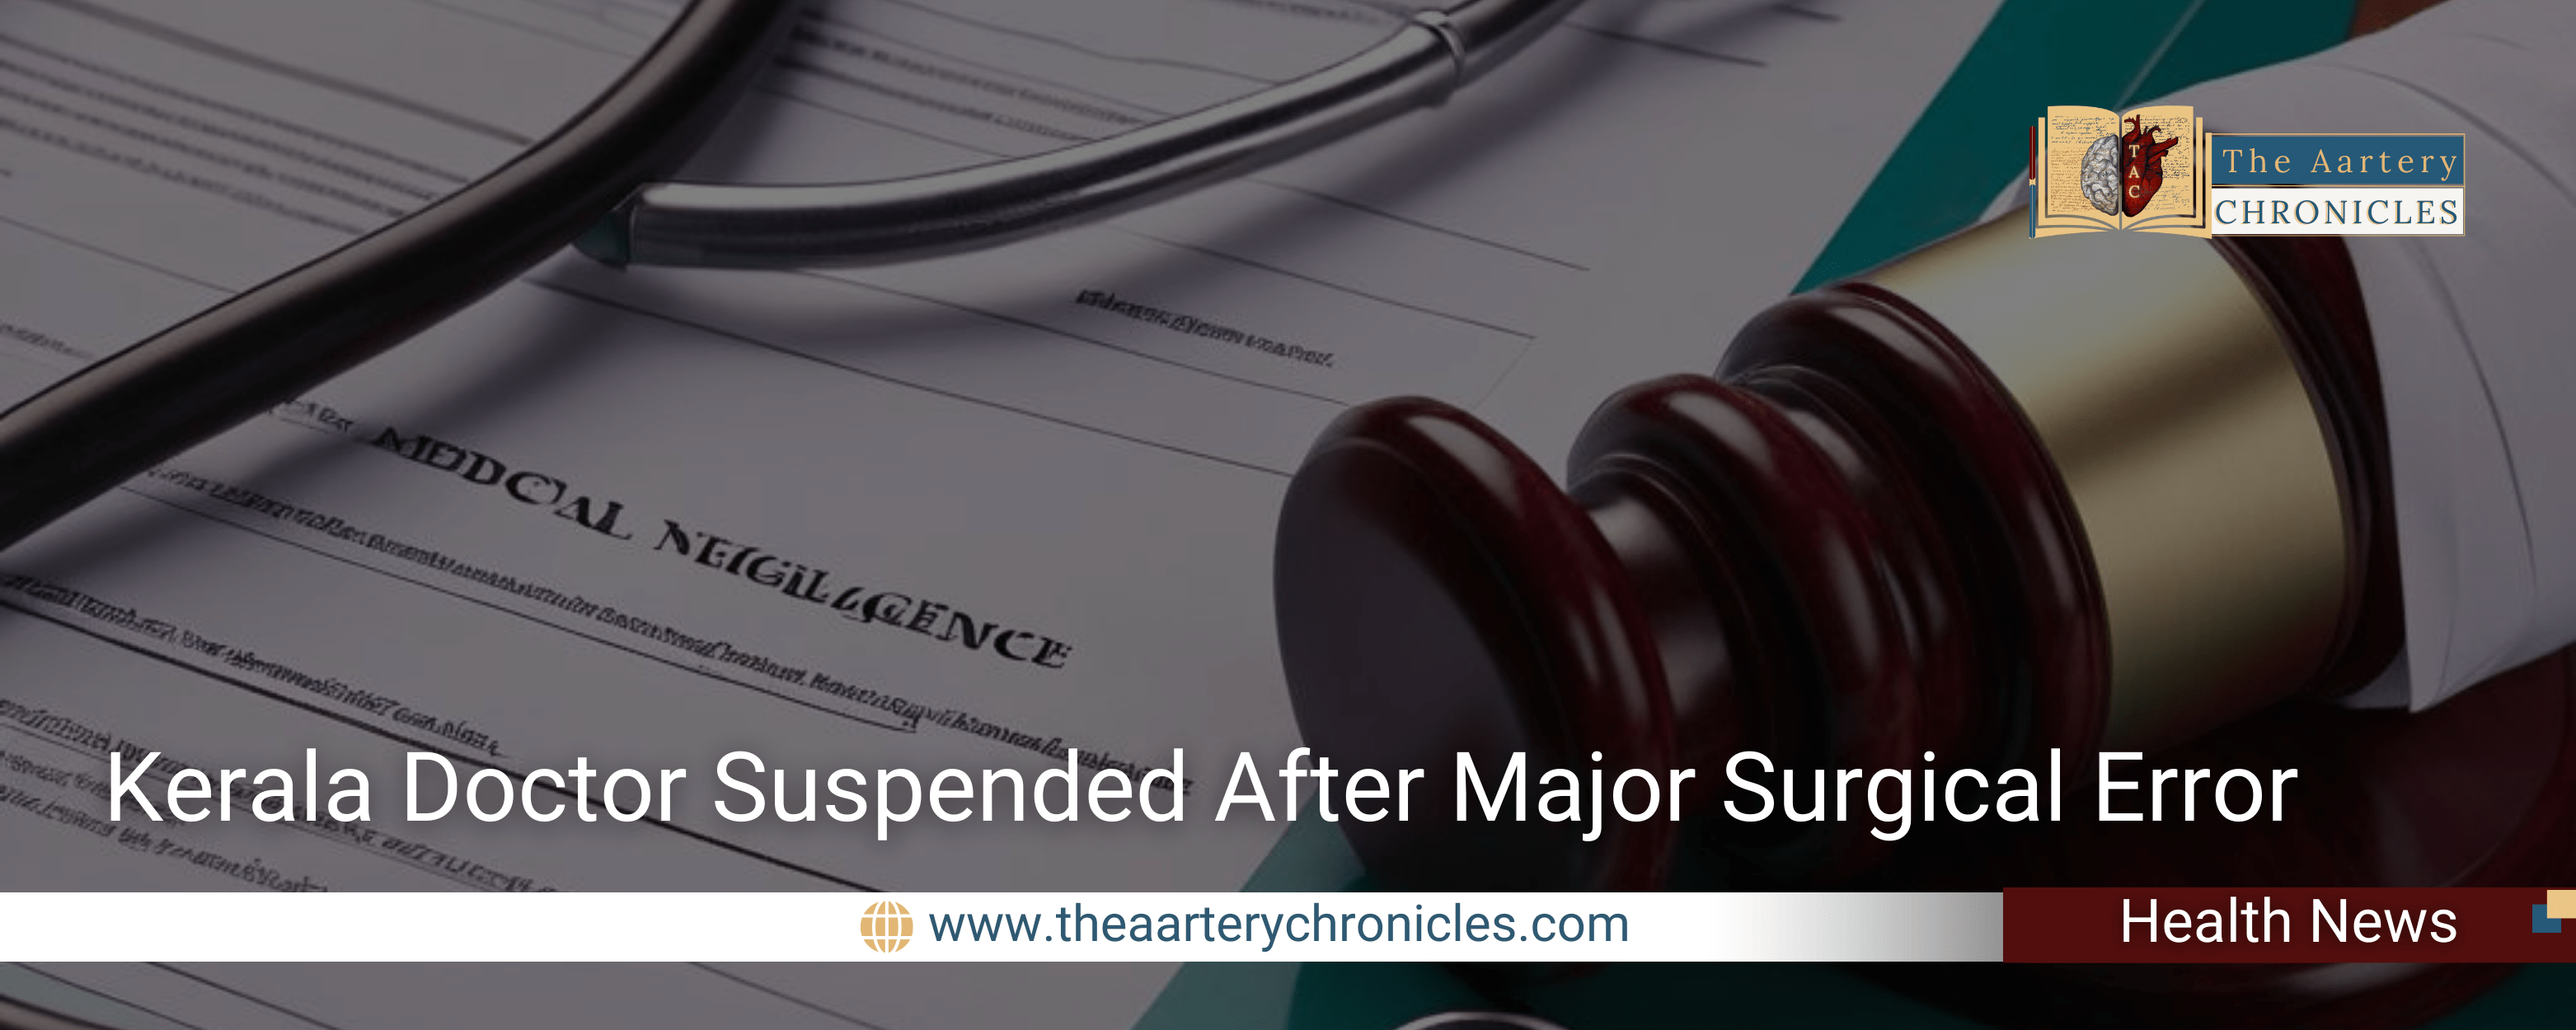 Kerala-Doctor-Suspended-After-Major-Surgical-Error​-The-Aartery-Chronicles-TAC